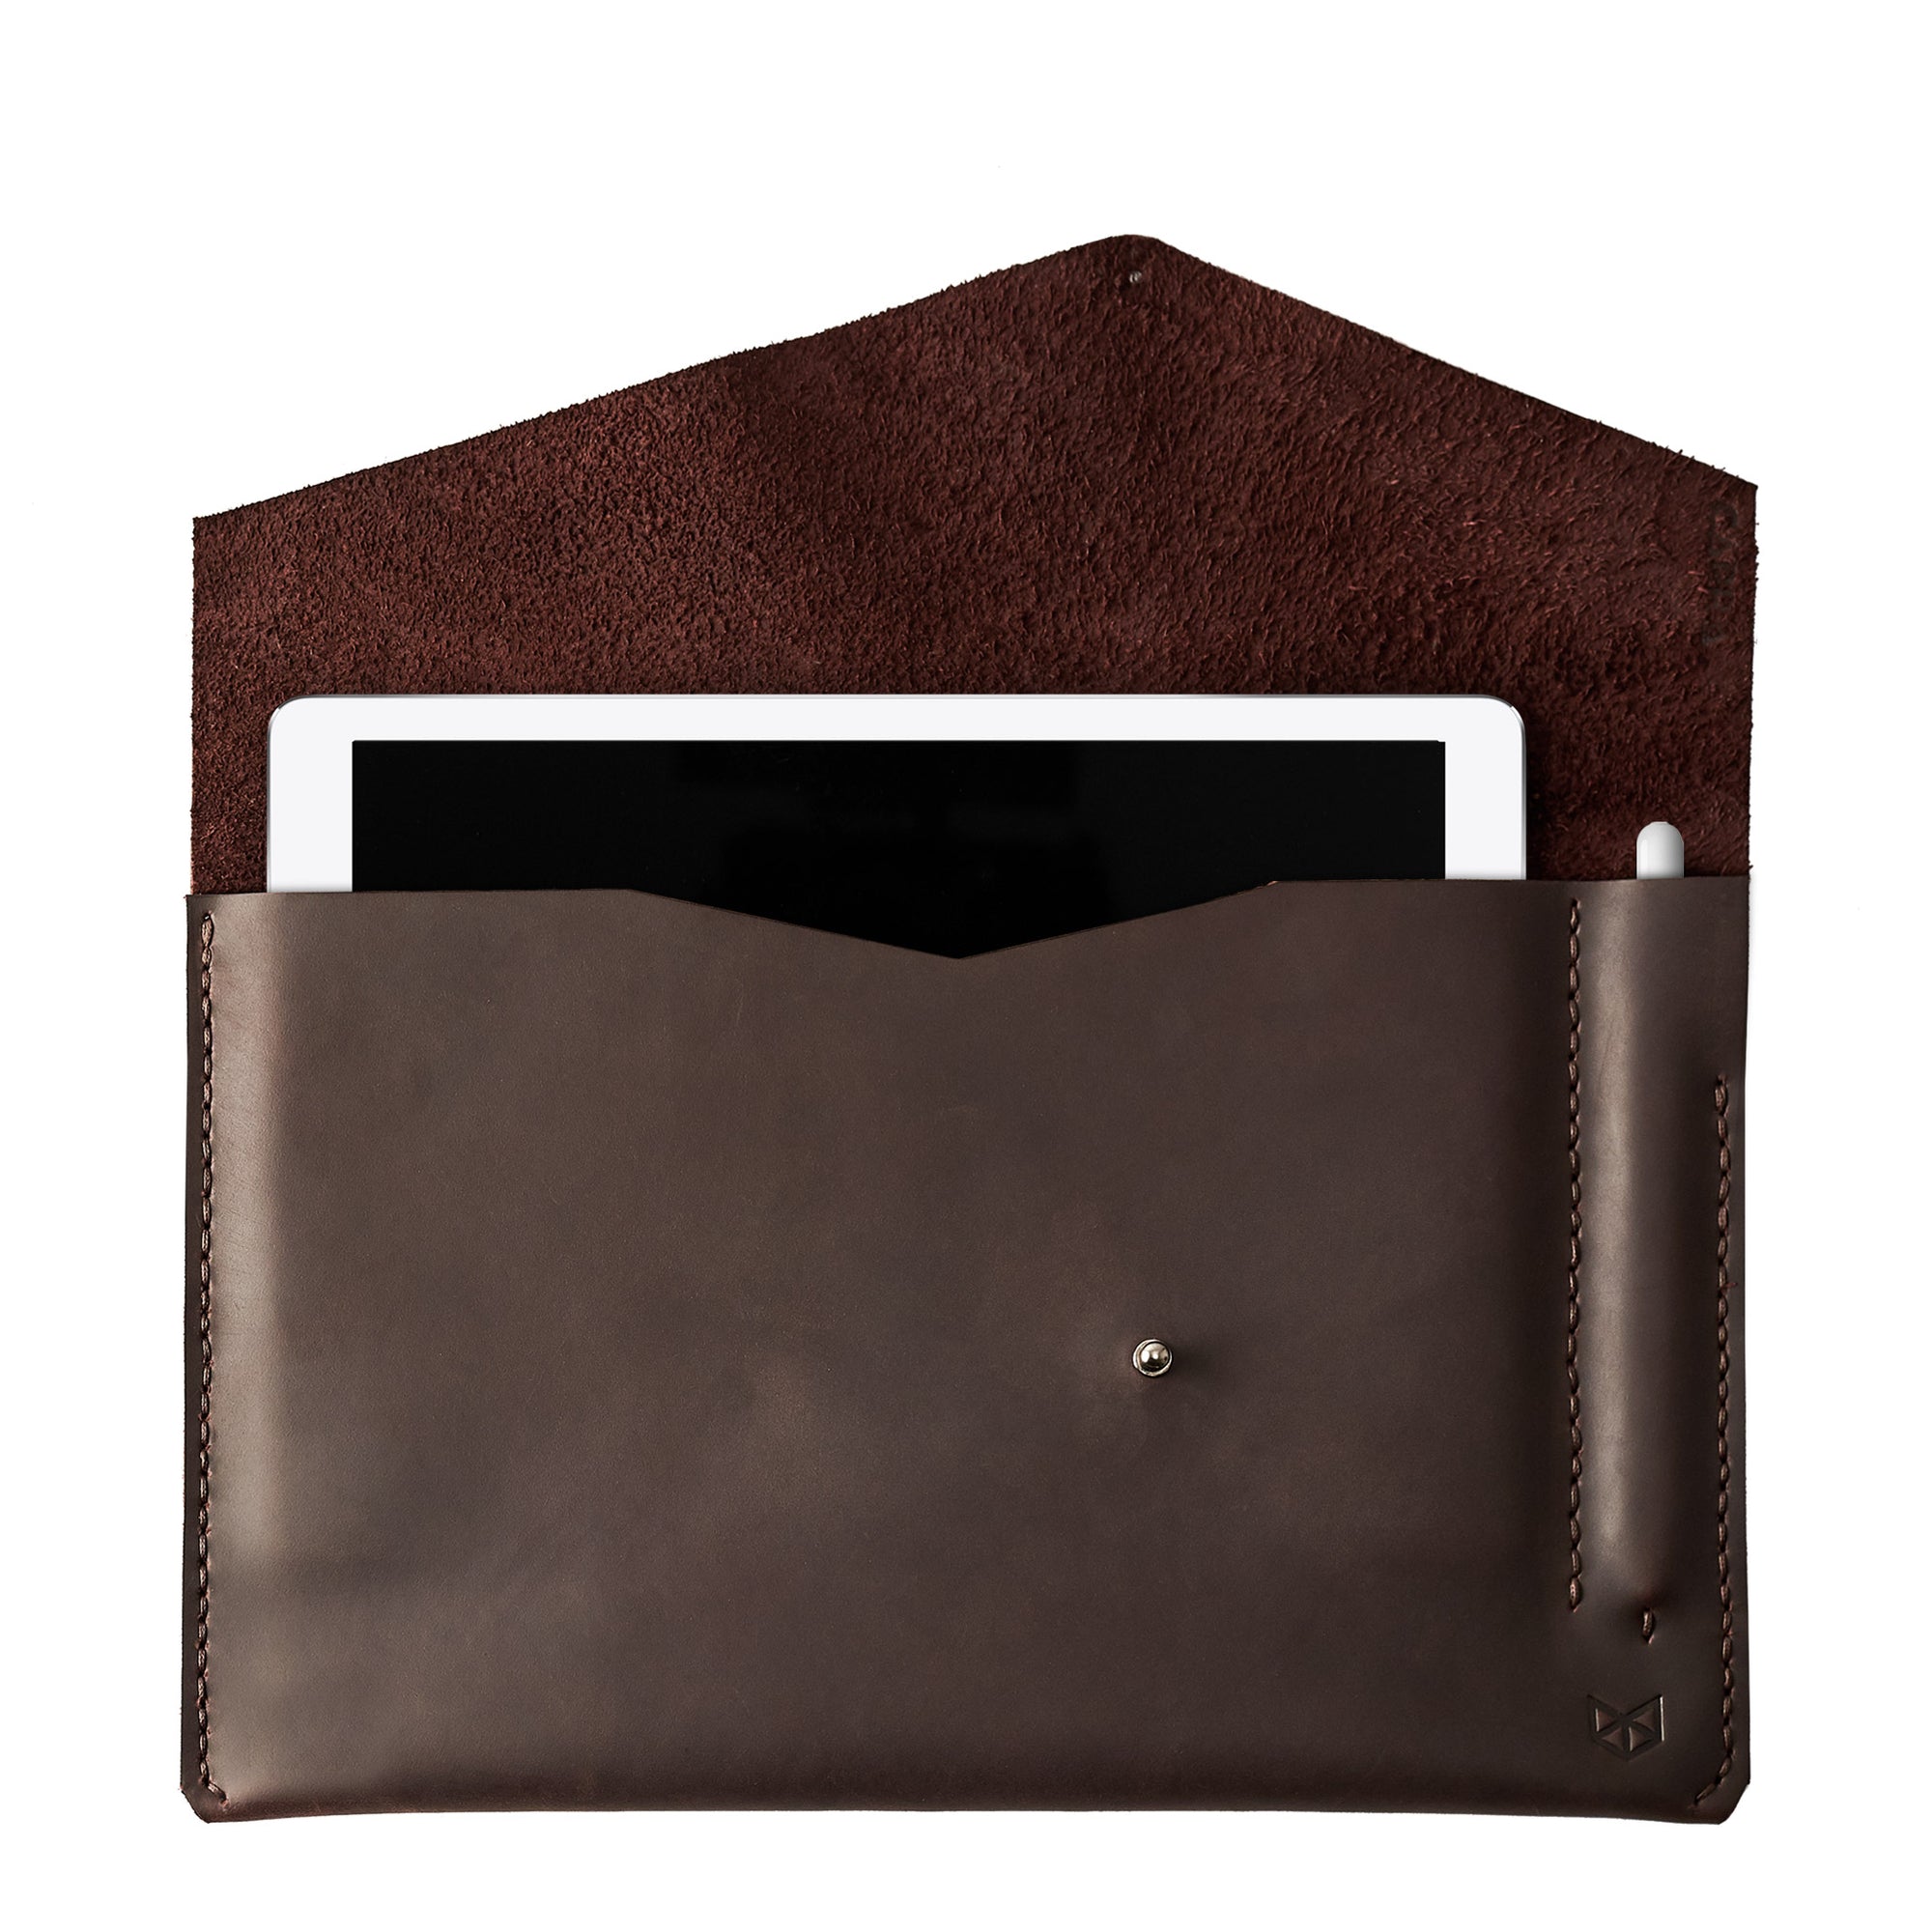 Dark brown leather sleeve for iPad pro 10.5 inch 12.9 inch. Mens gifts